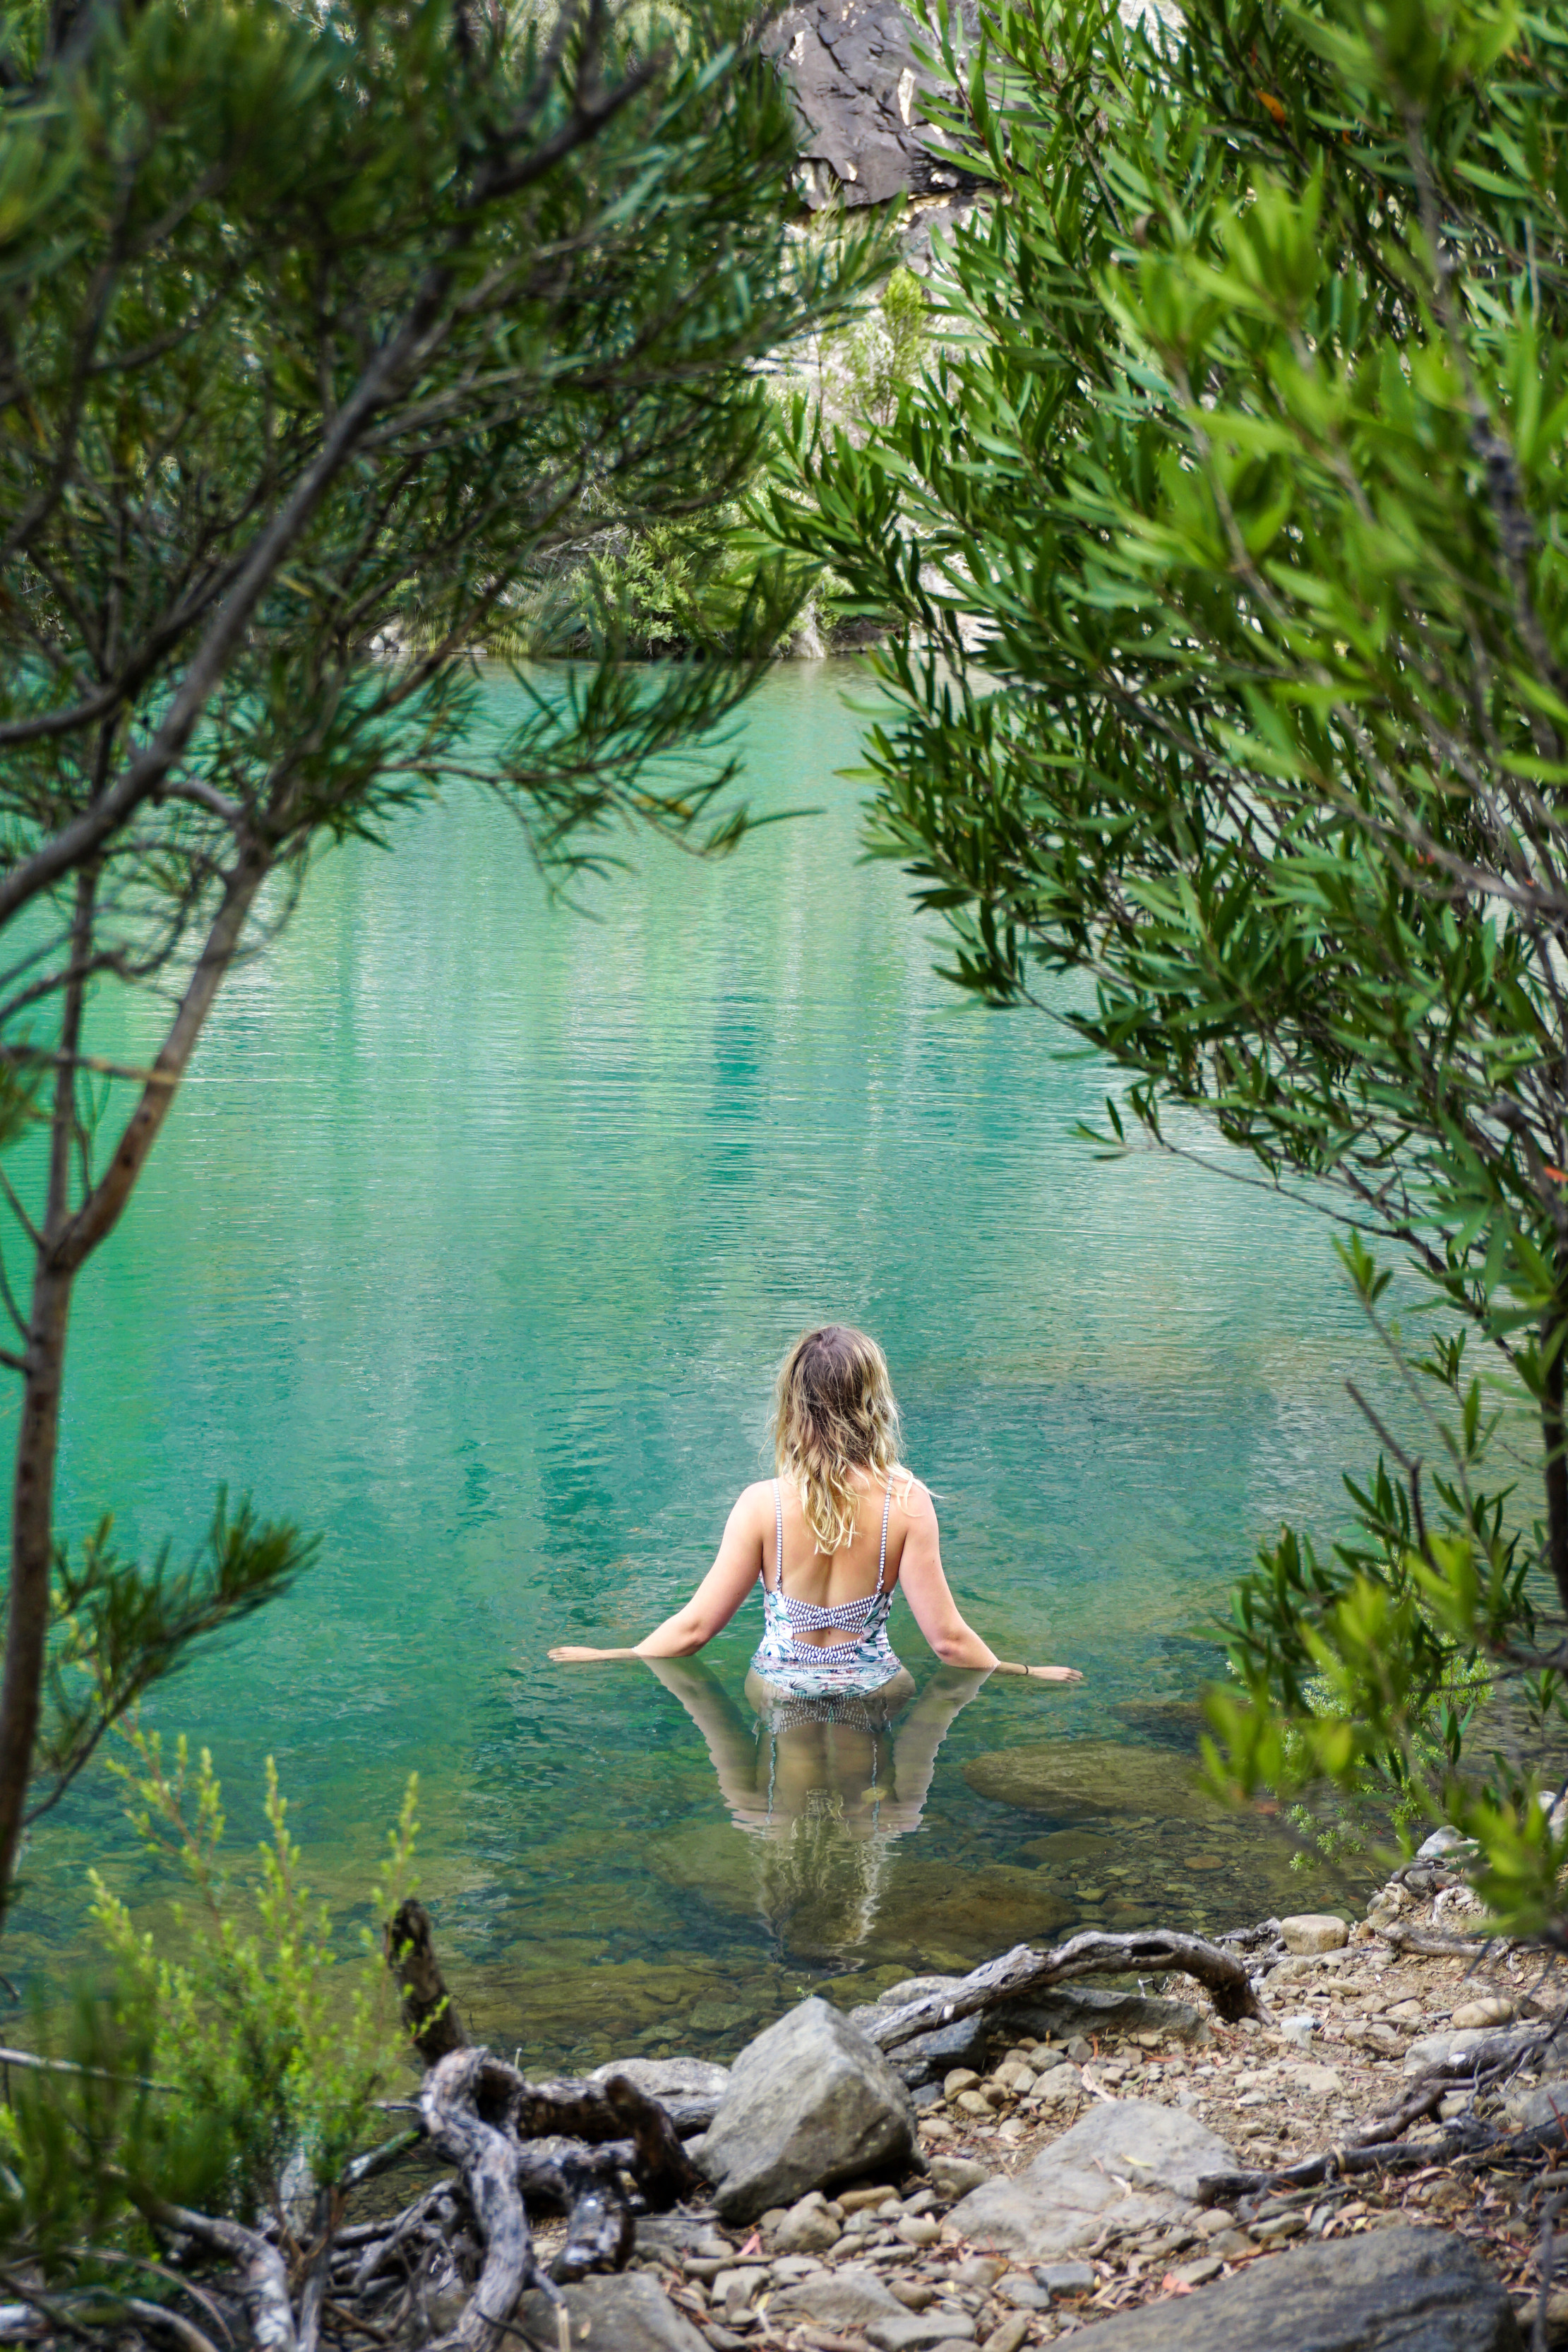 Incredible image of a woman walking into a tranquil, vibrant blue pool, surrounded by lush bushland.